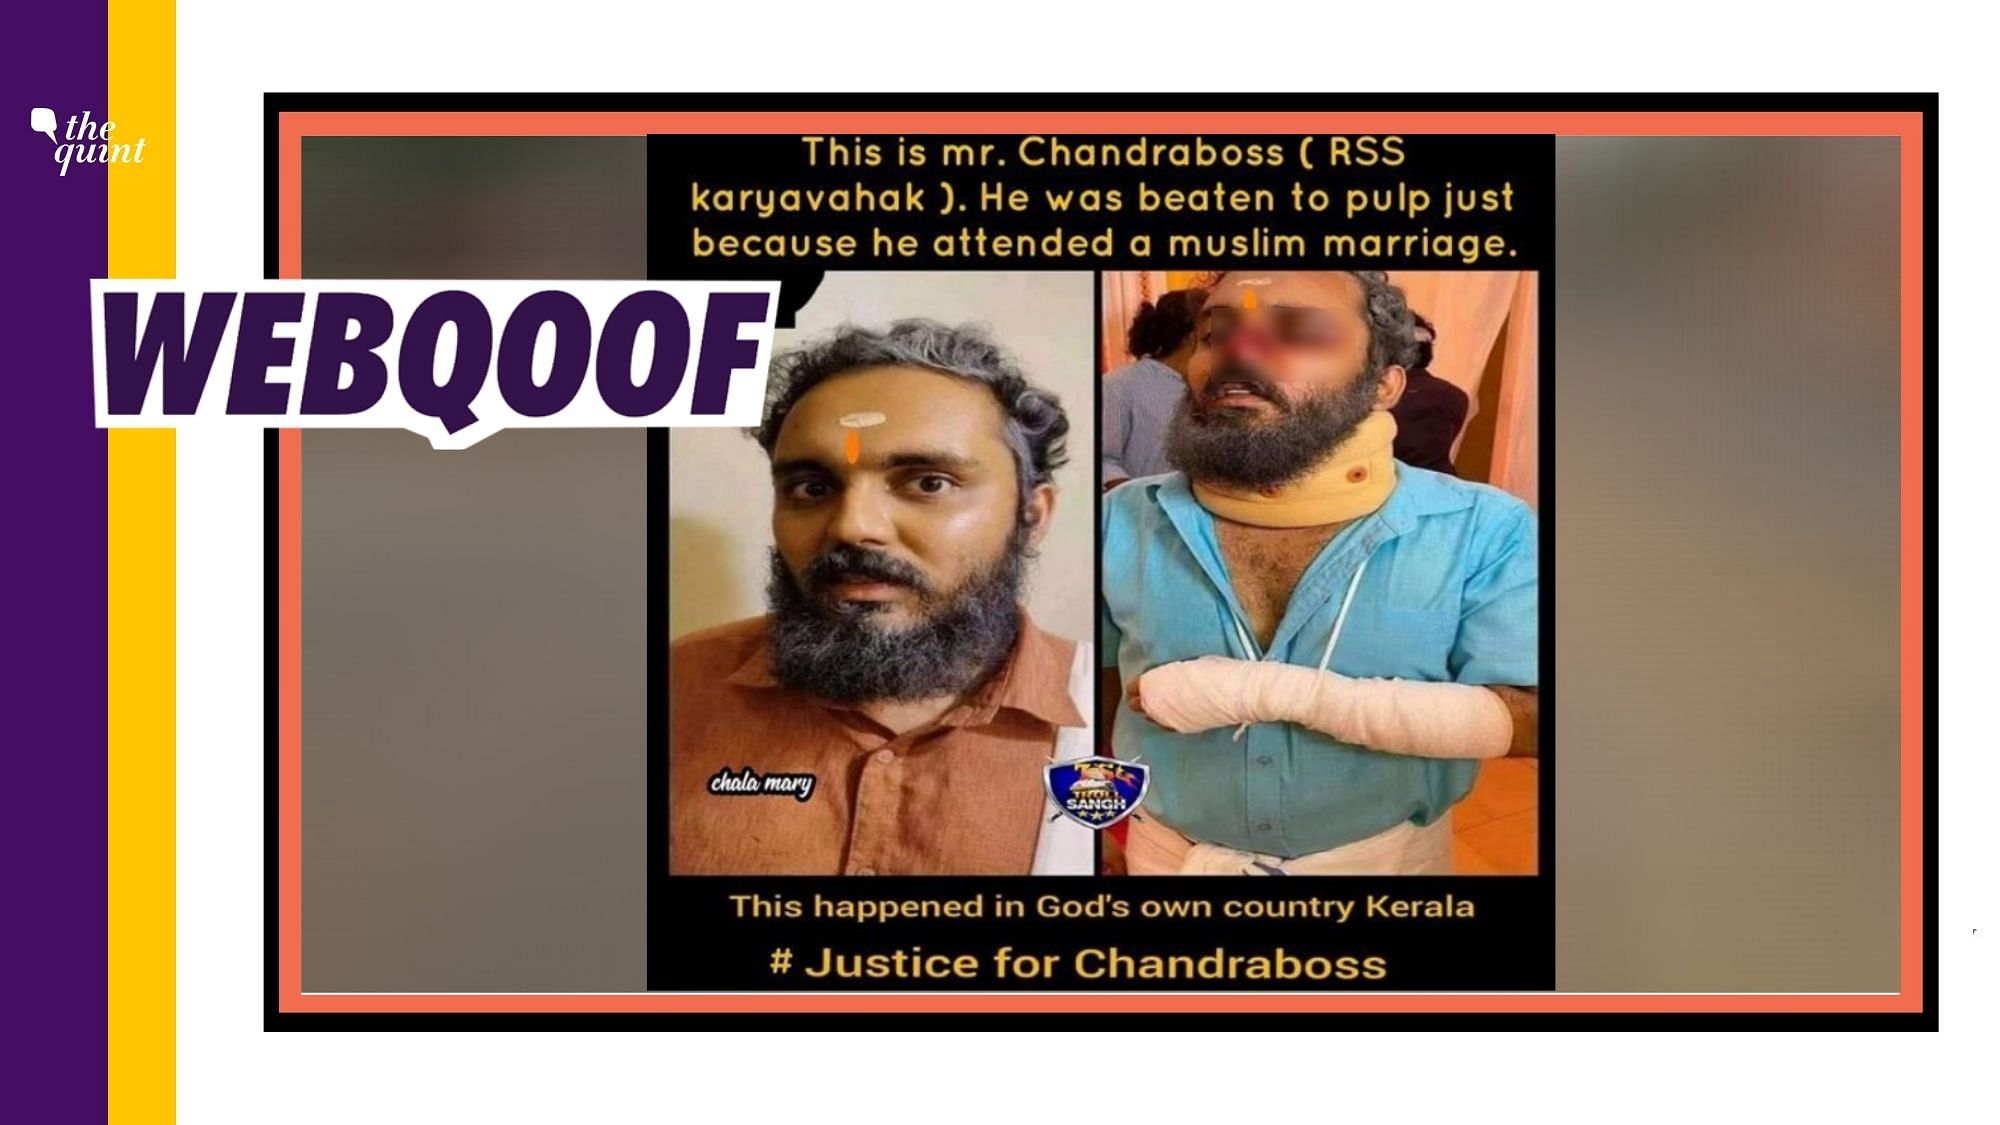 Images of an actor from Malayalam web series were passed off with the false claim that they show an RSS man beaten in Kerala.